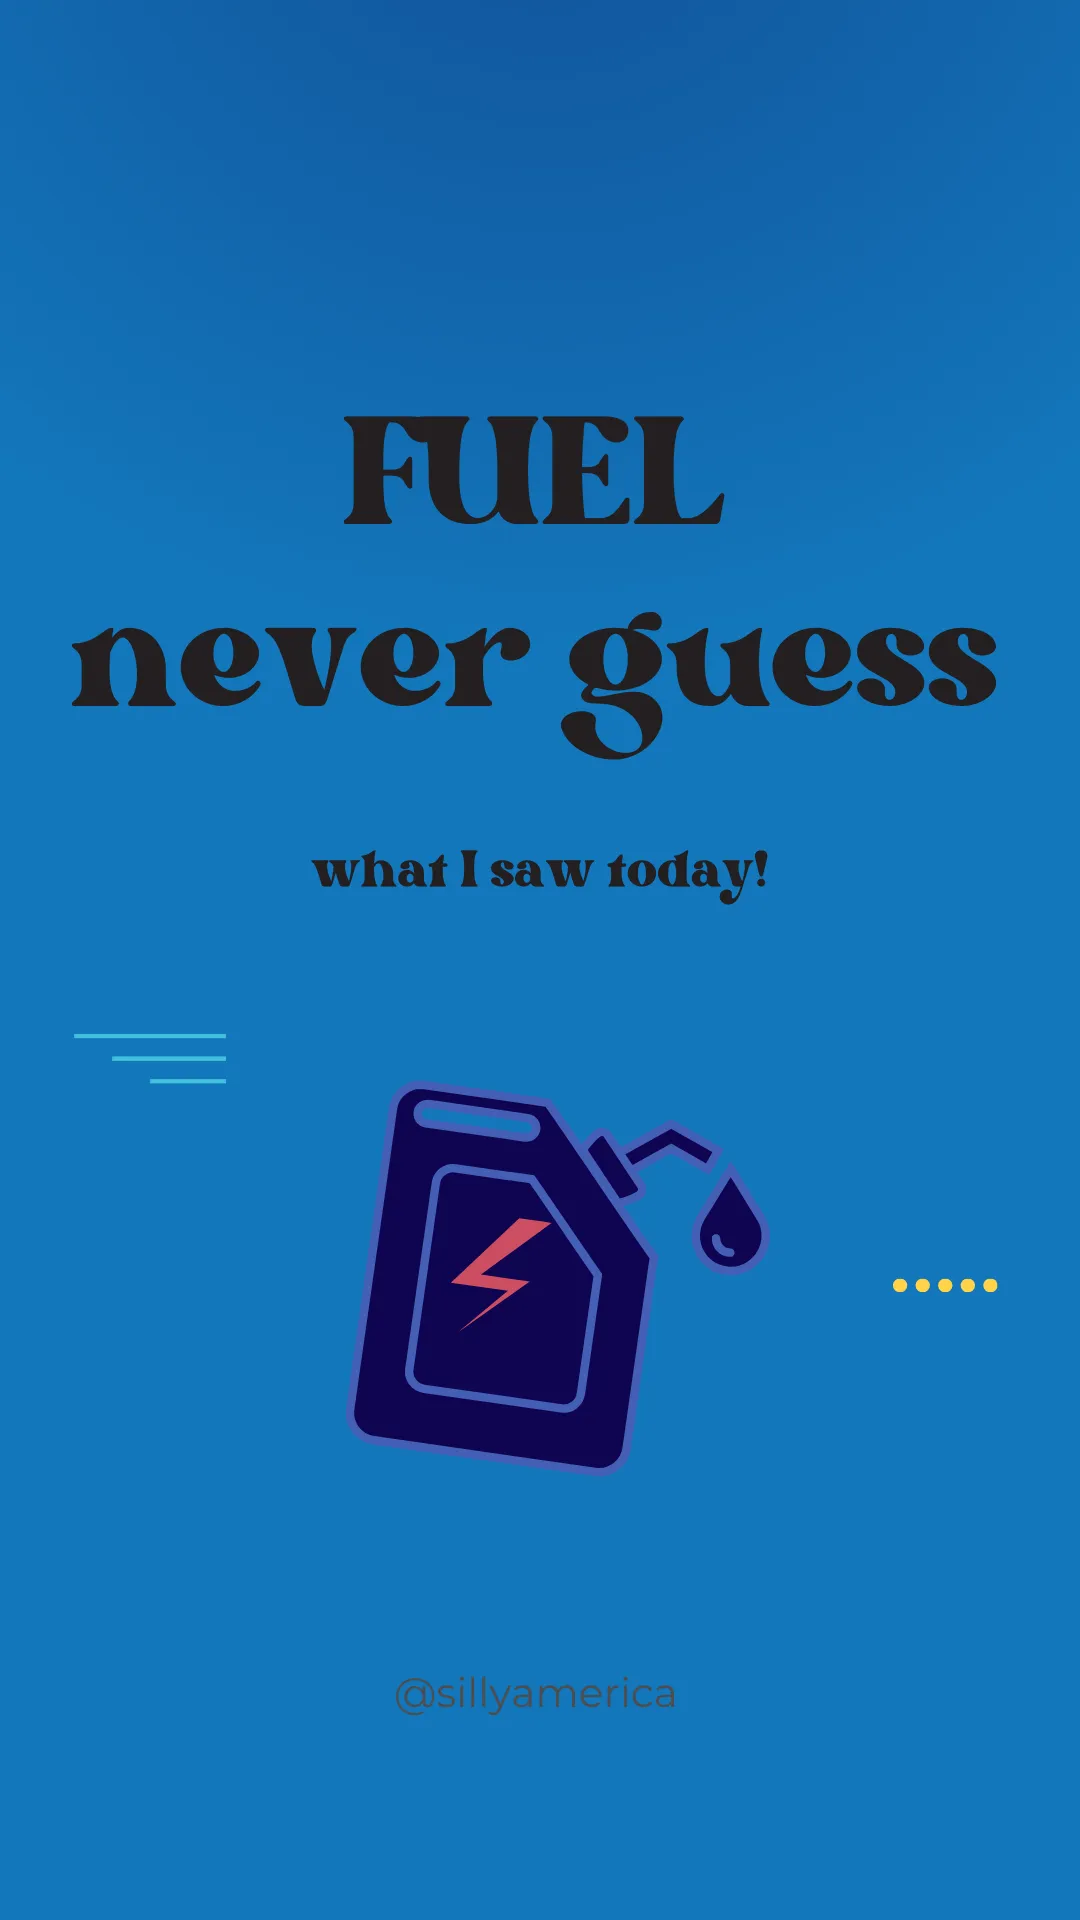 FUEL never guess what I saw today! - Road Trip Puns